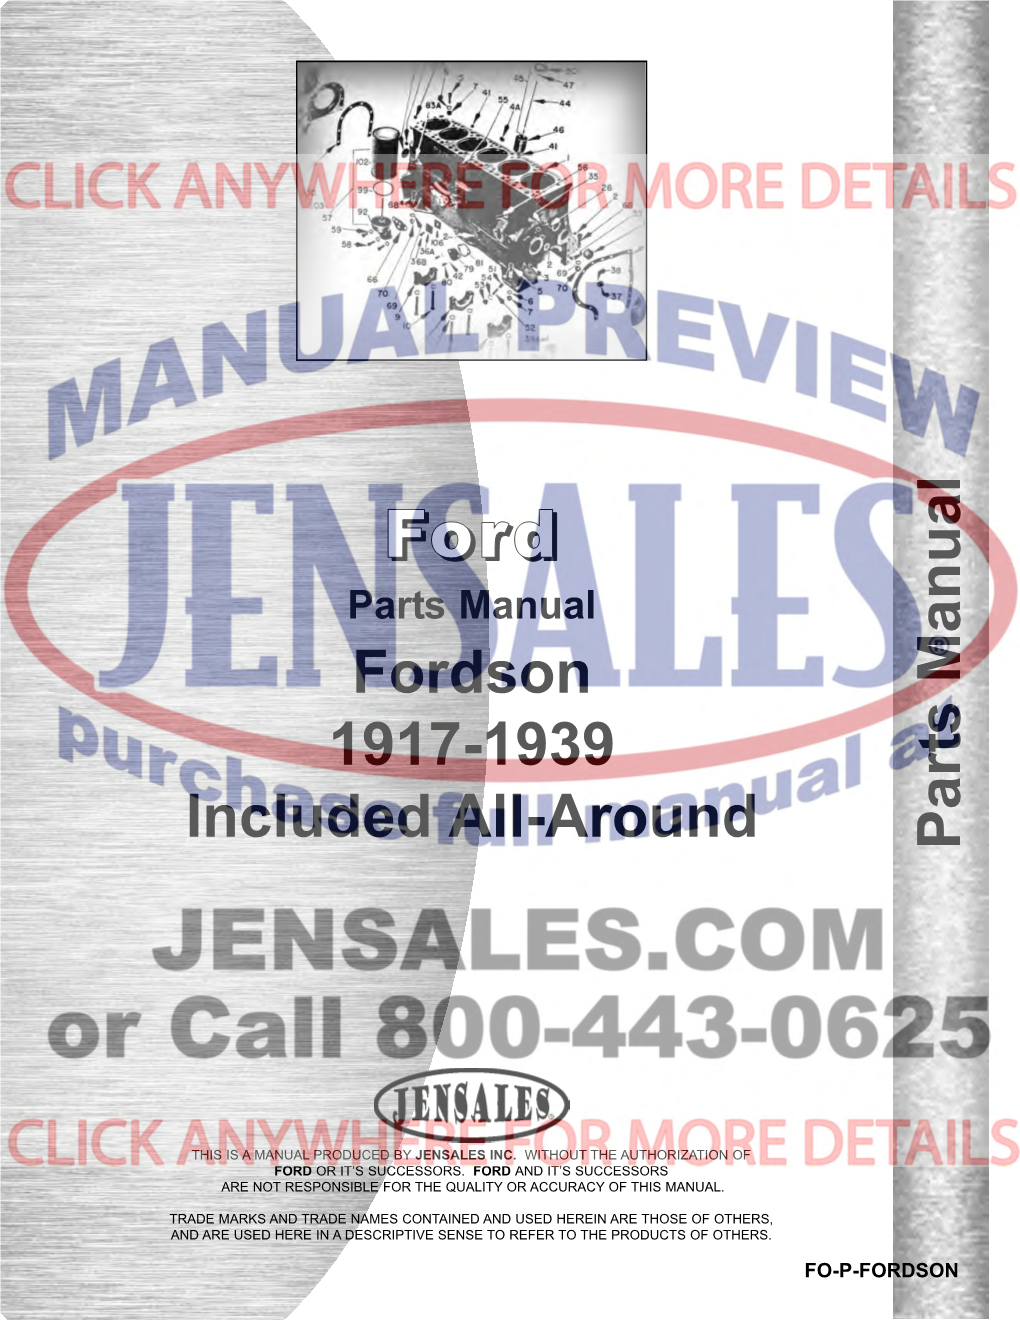 Ford Tractor Parts Manual (FO-P-FORDSON)